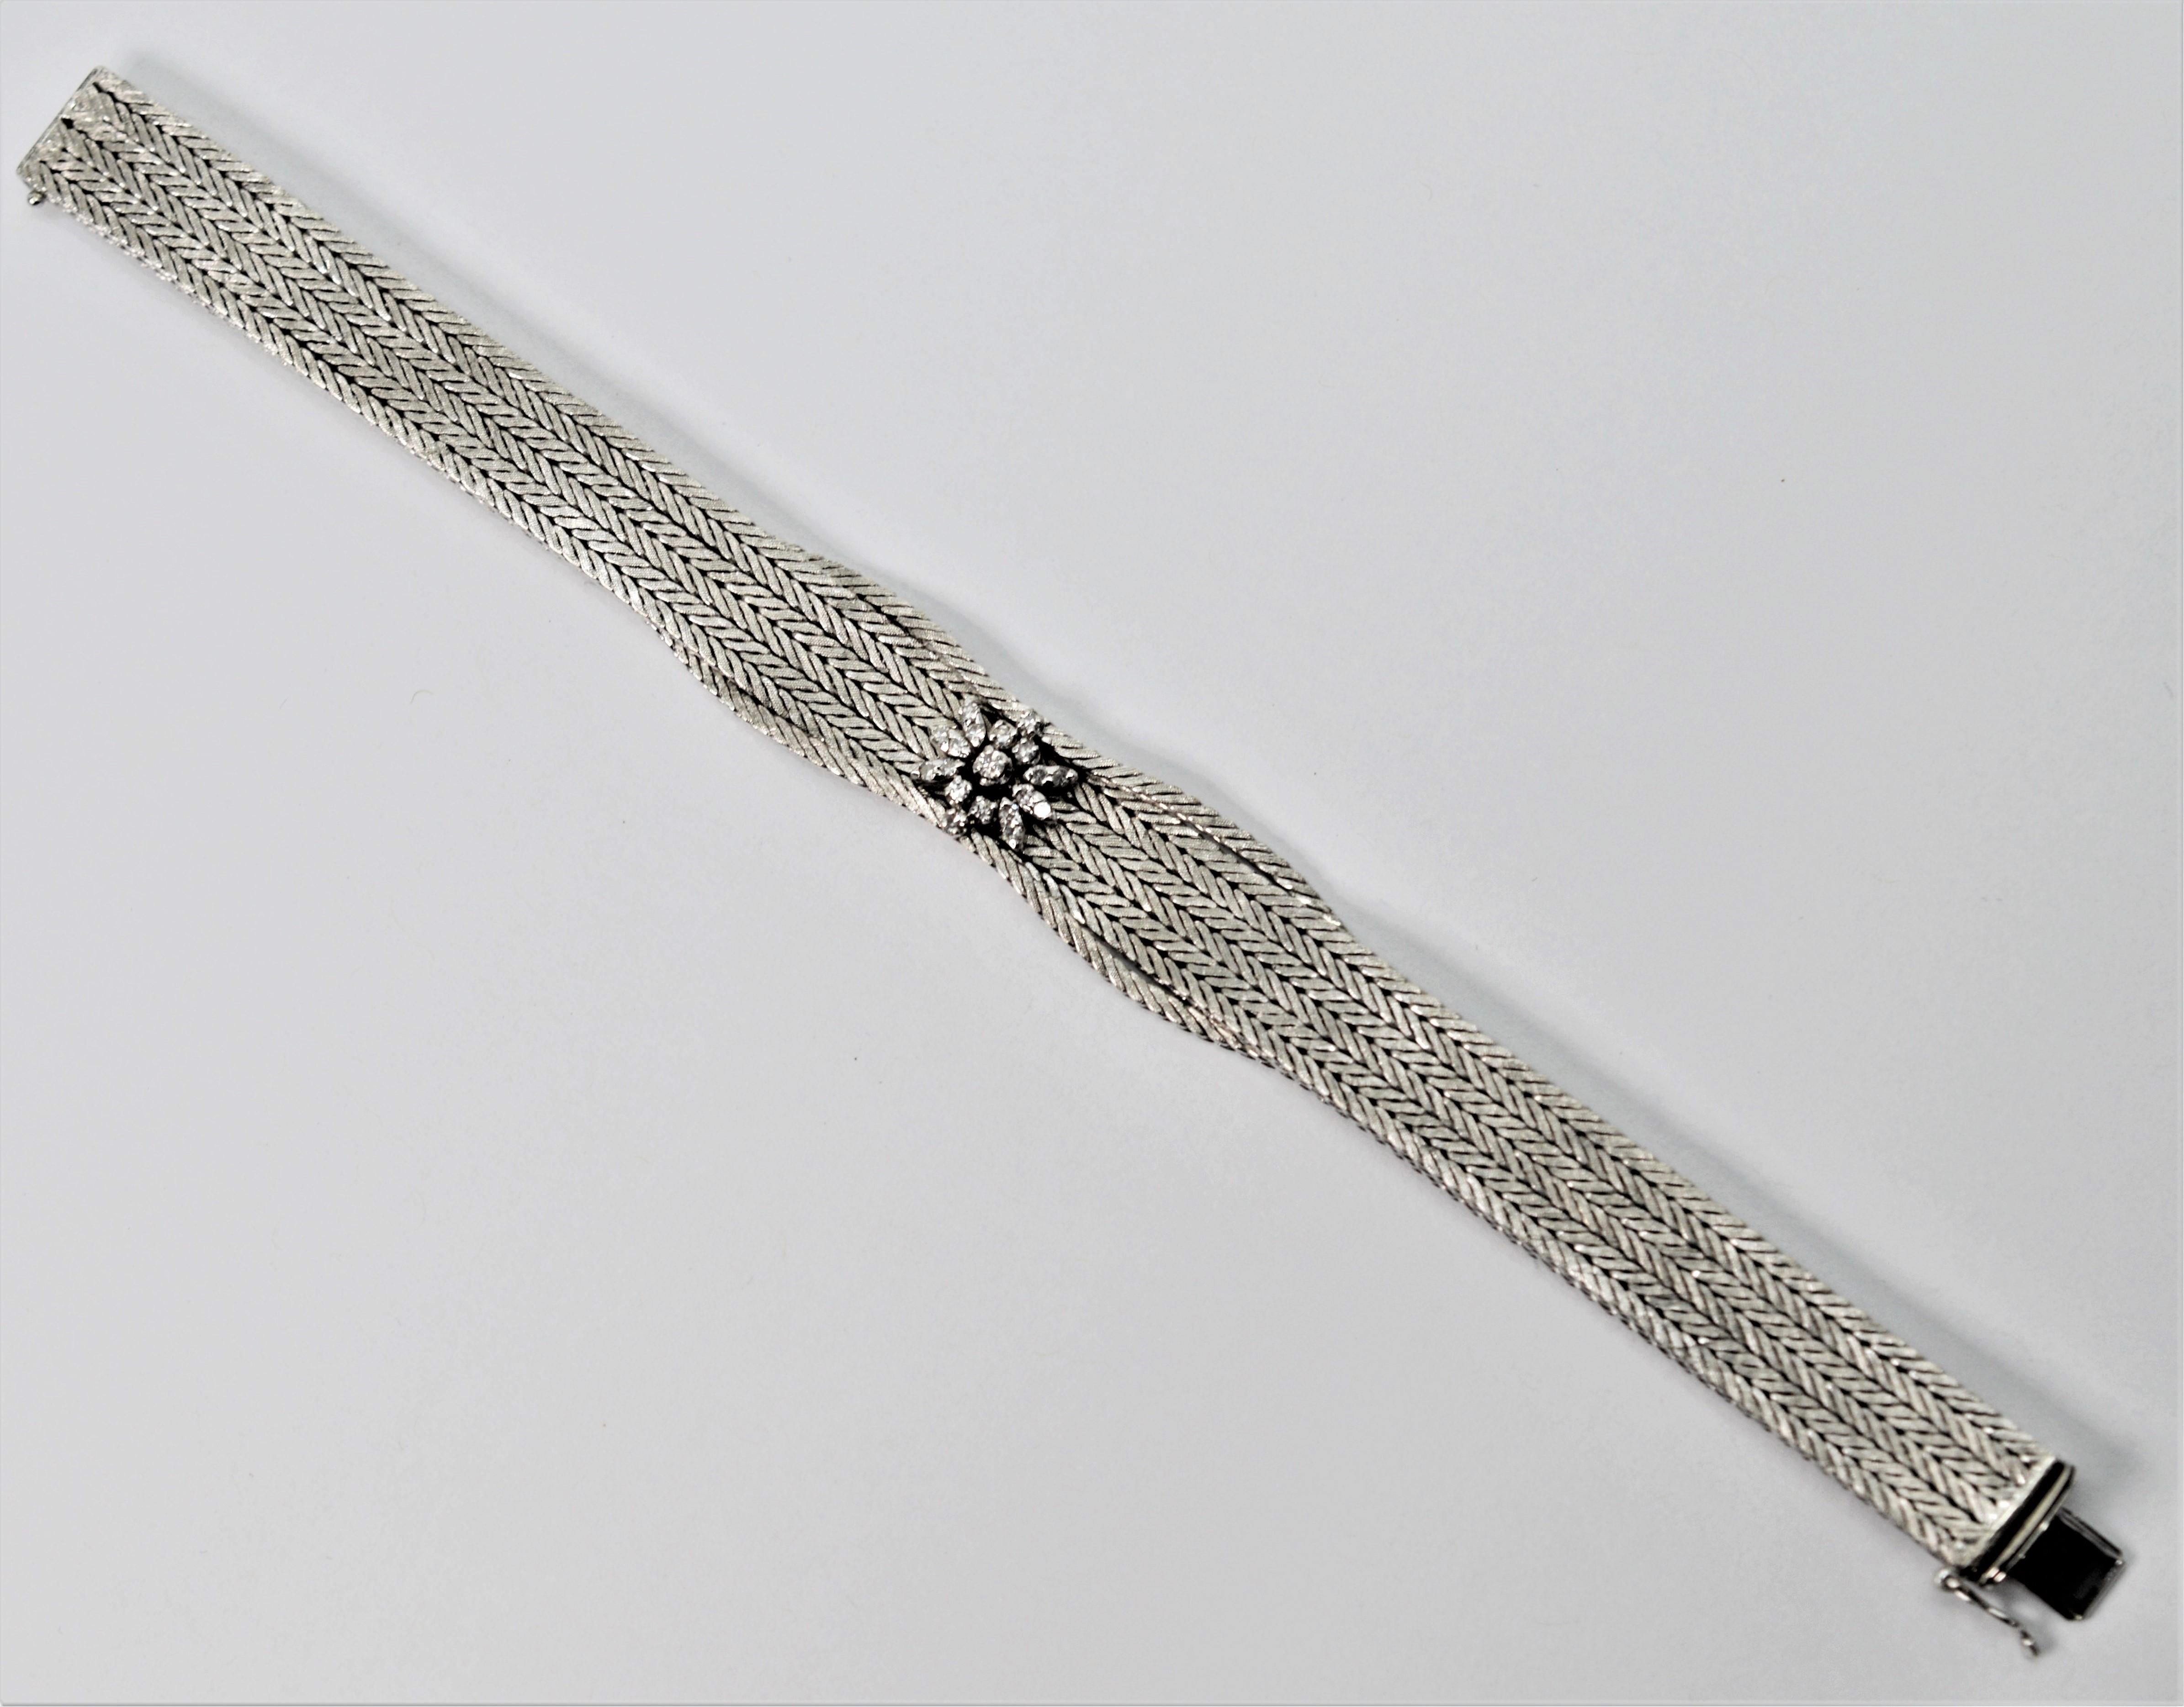 Petals of diamonds create the floral focal point of this stunning eighteen karat 18K white gold chain bracelet. Expert Italian craftsmanship is reflected in the meticulously woven satin white gold herringbone patterned chain that is married to form